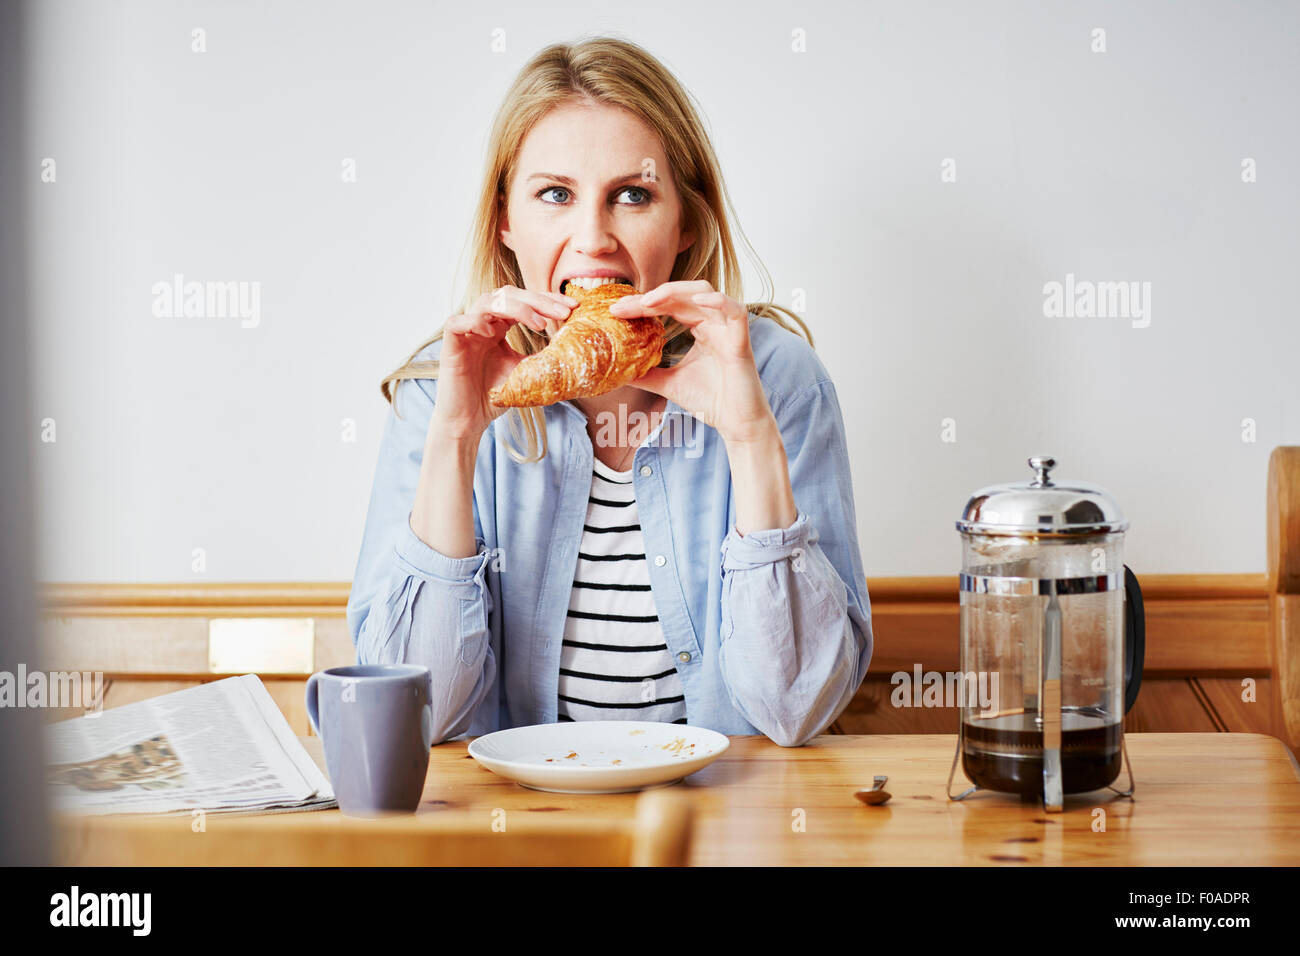 Mid adult woman eating croissant Stock Photo